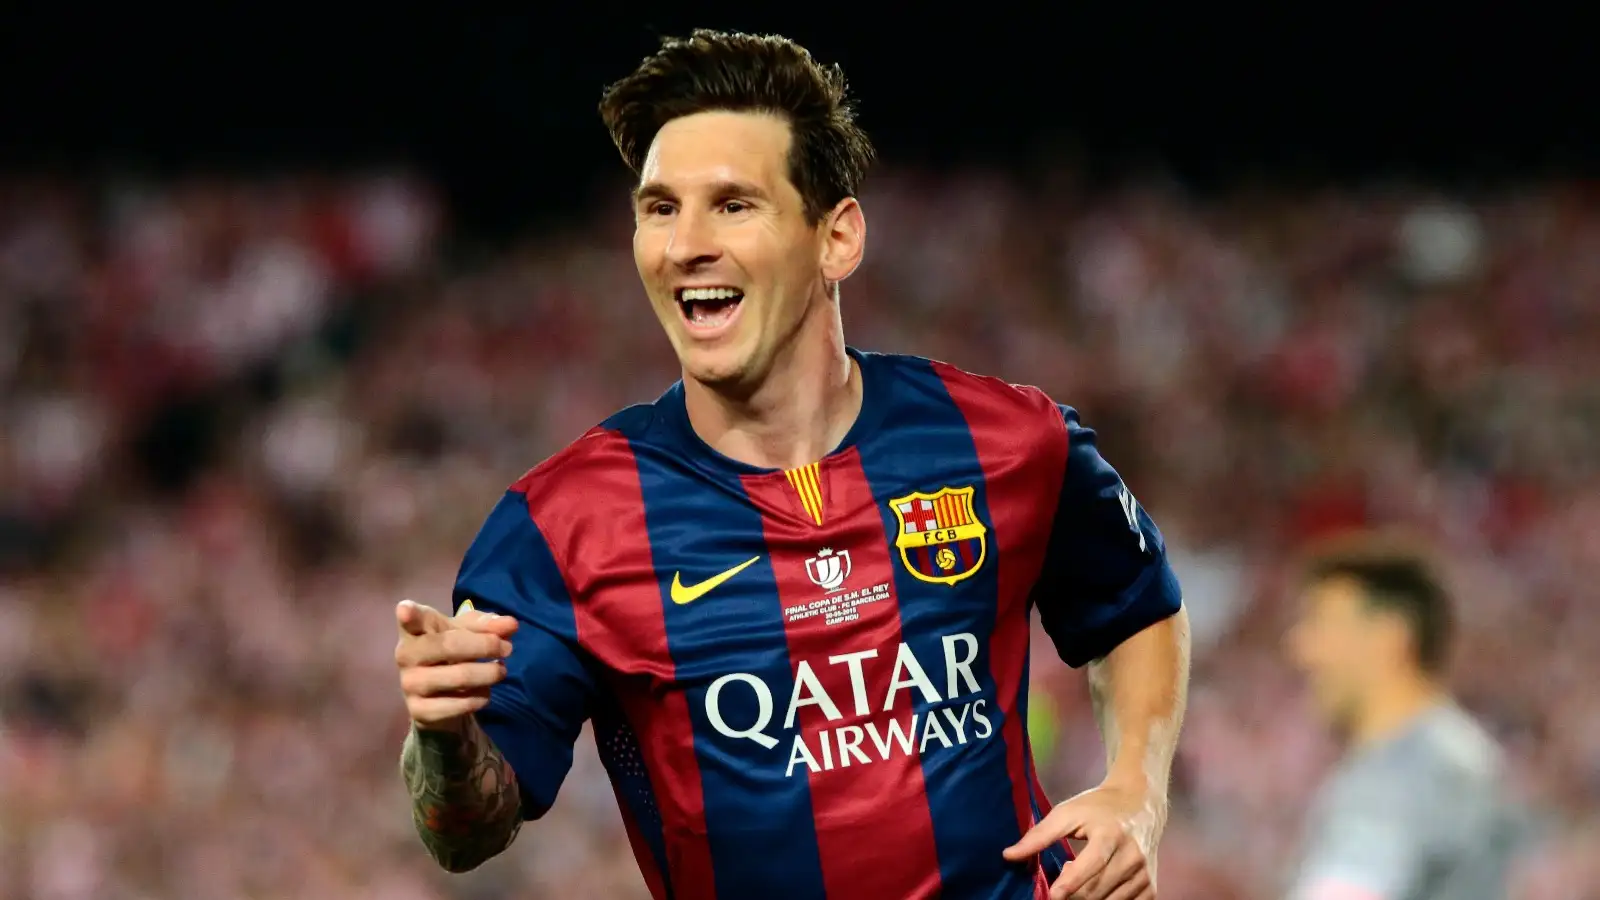 Can you name every team Lionel Messi has scored 5+ goals against?